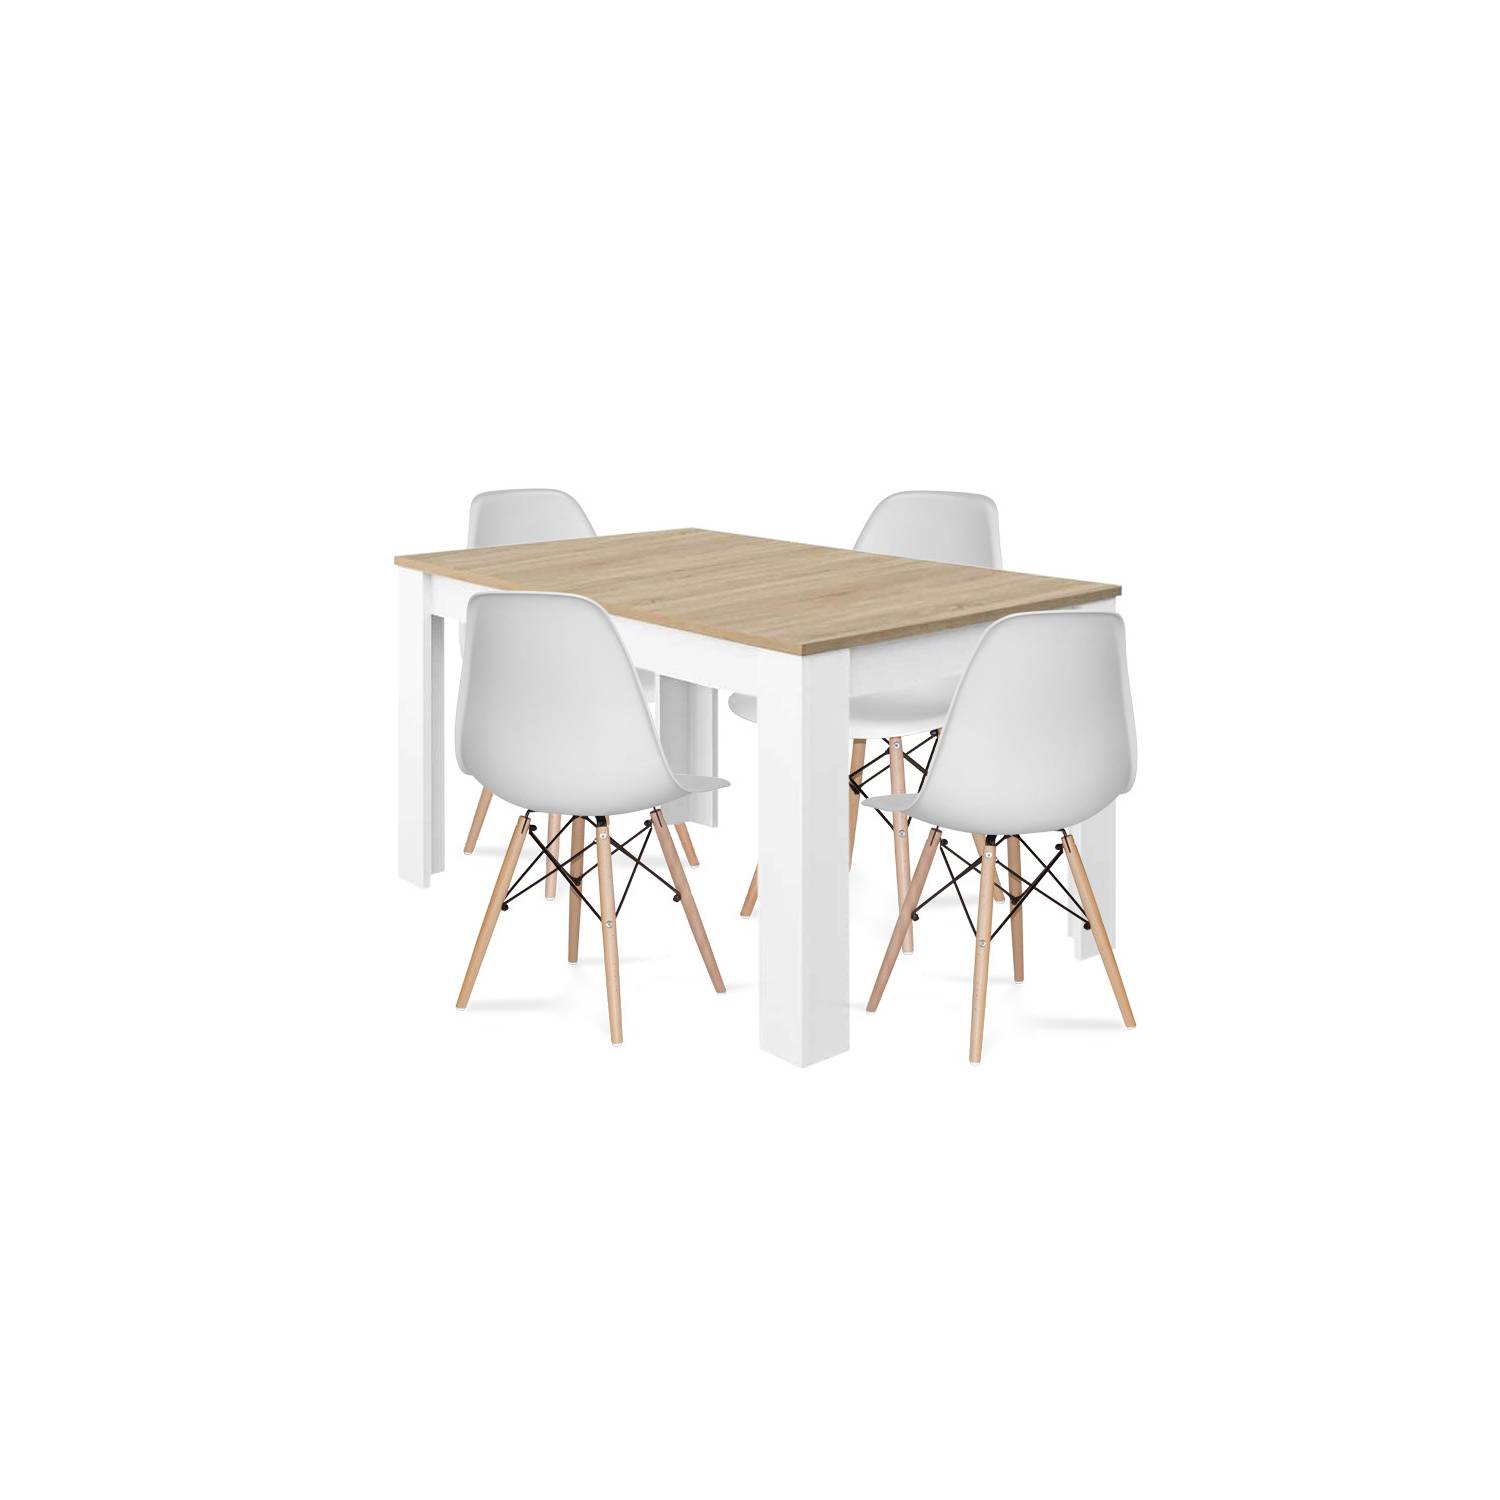 PACK TABLE EXTENSIBLE NORDIK ET 4 CHAISES TOWER WOOD BLANCHES